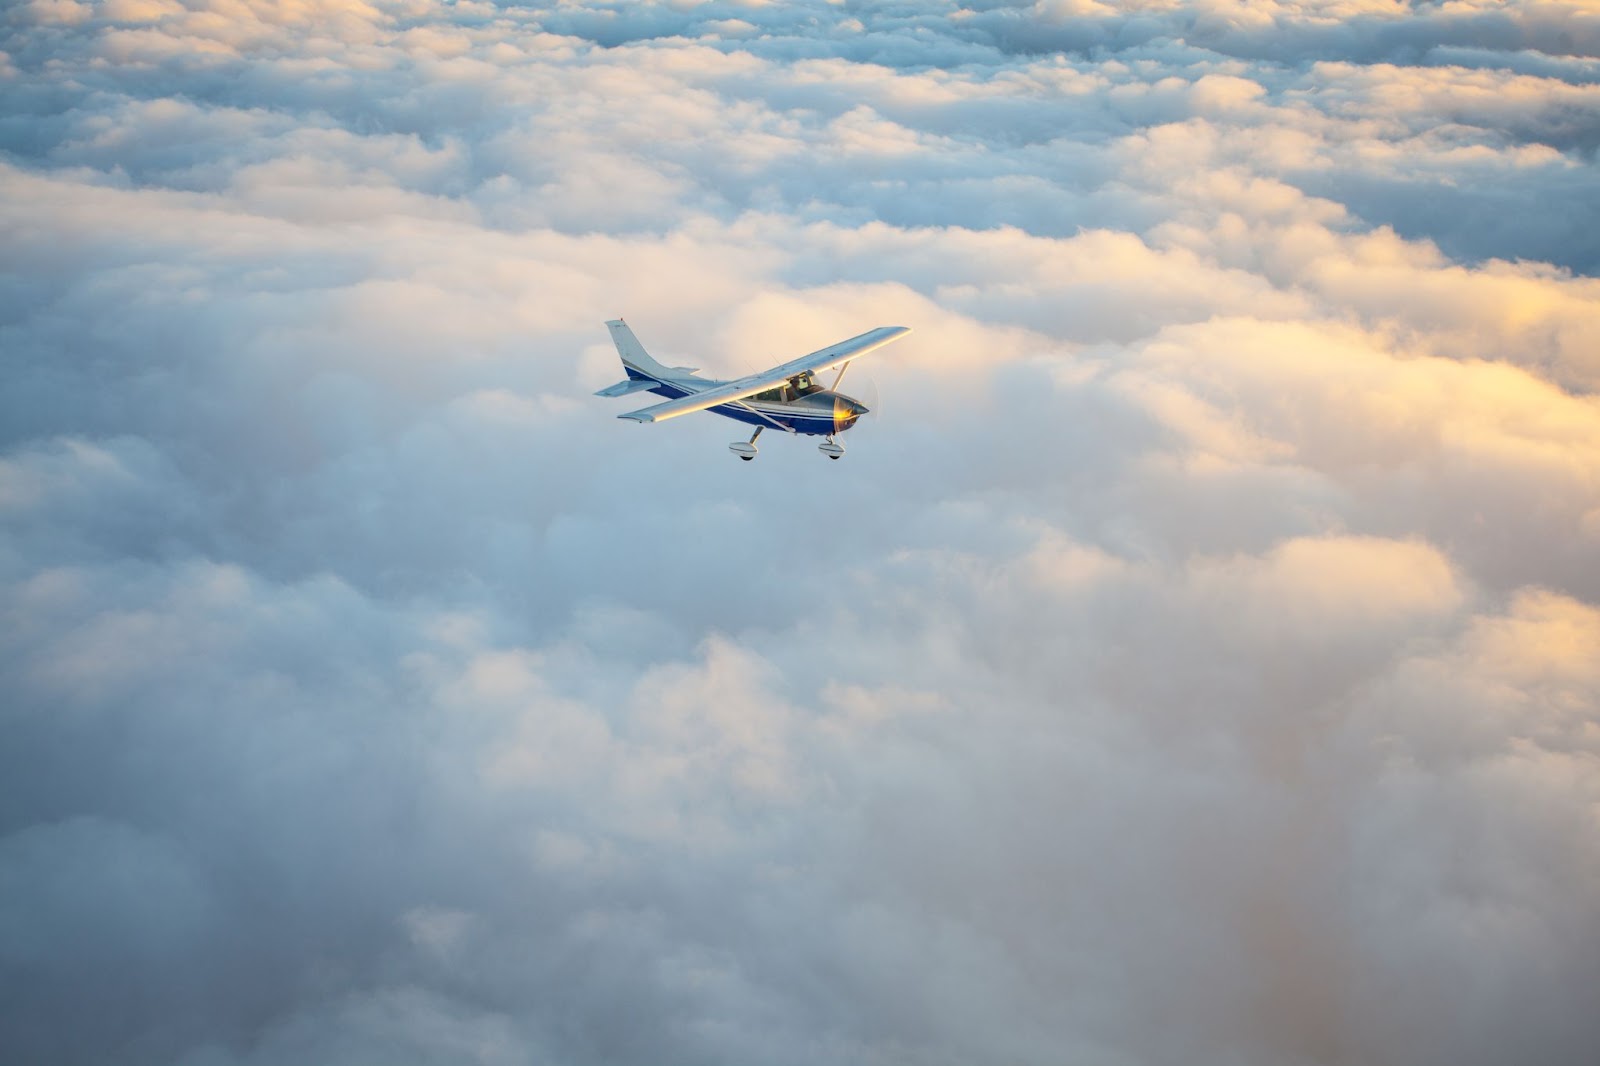 An airplane flying above the clouds.